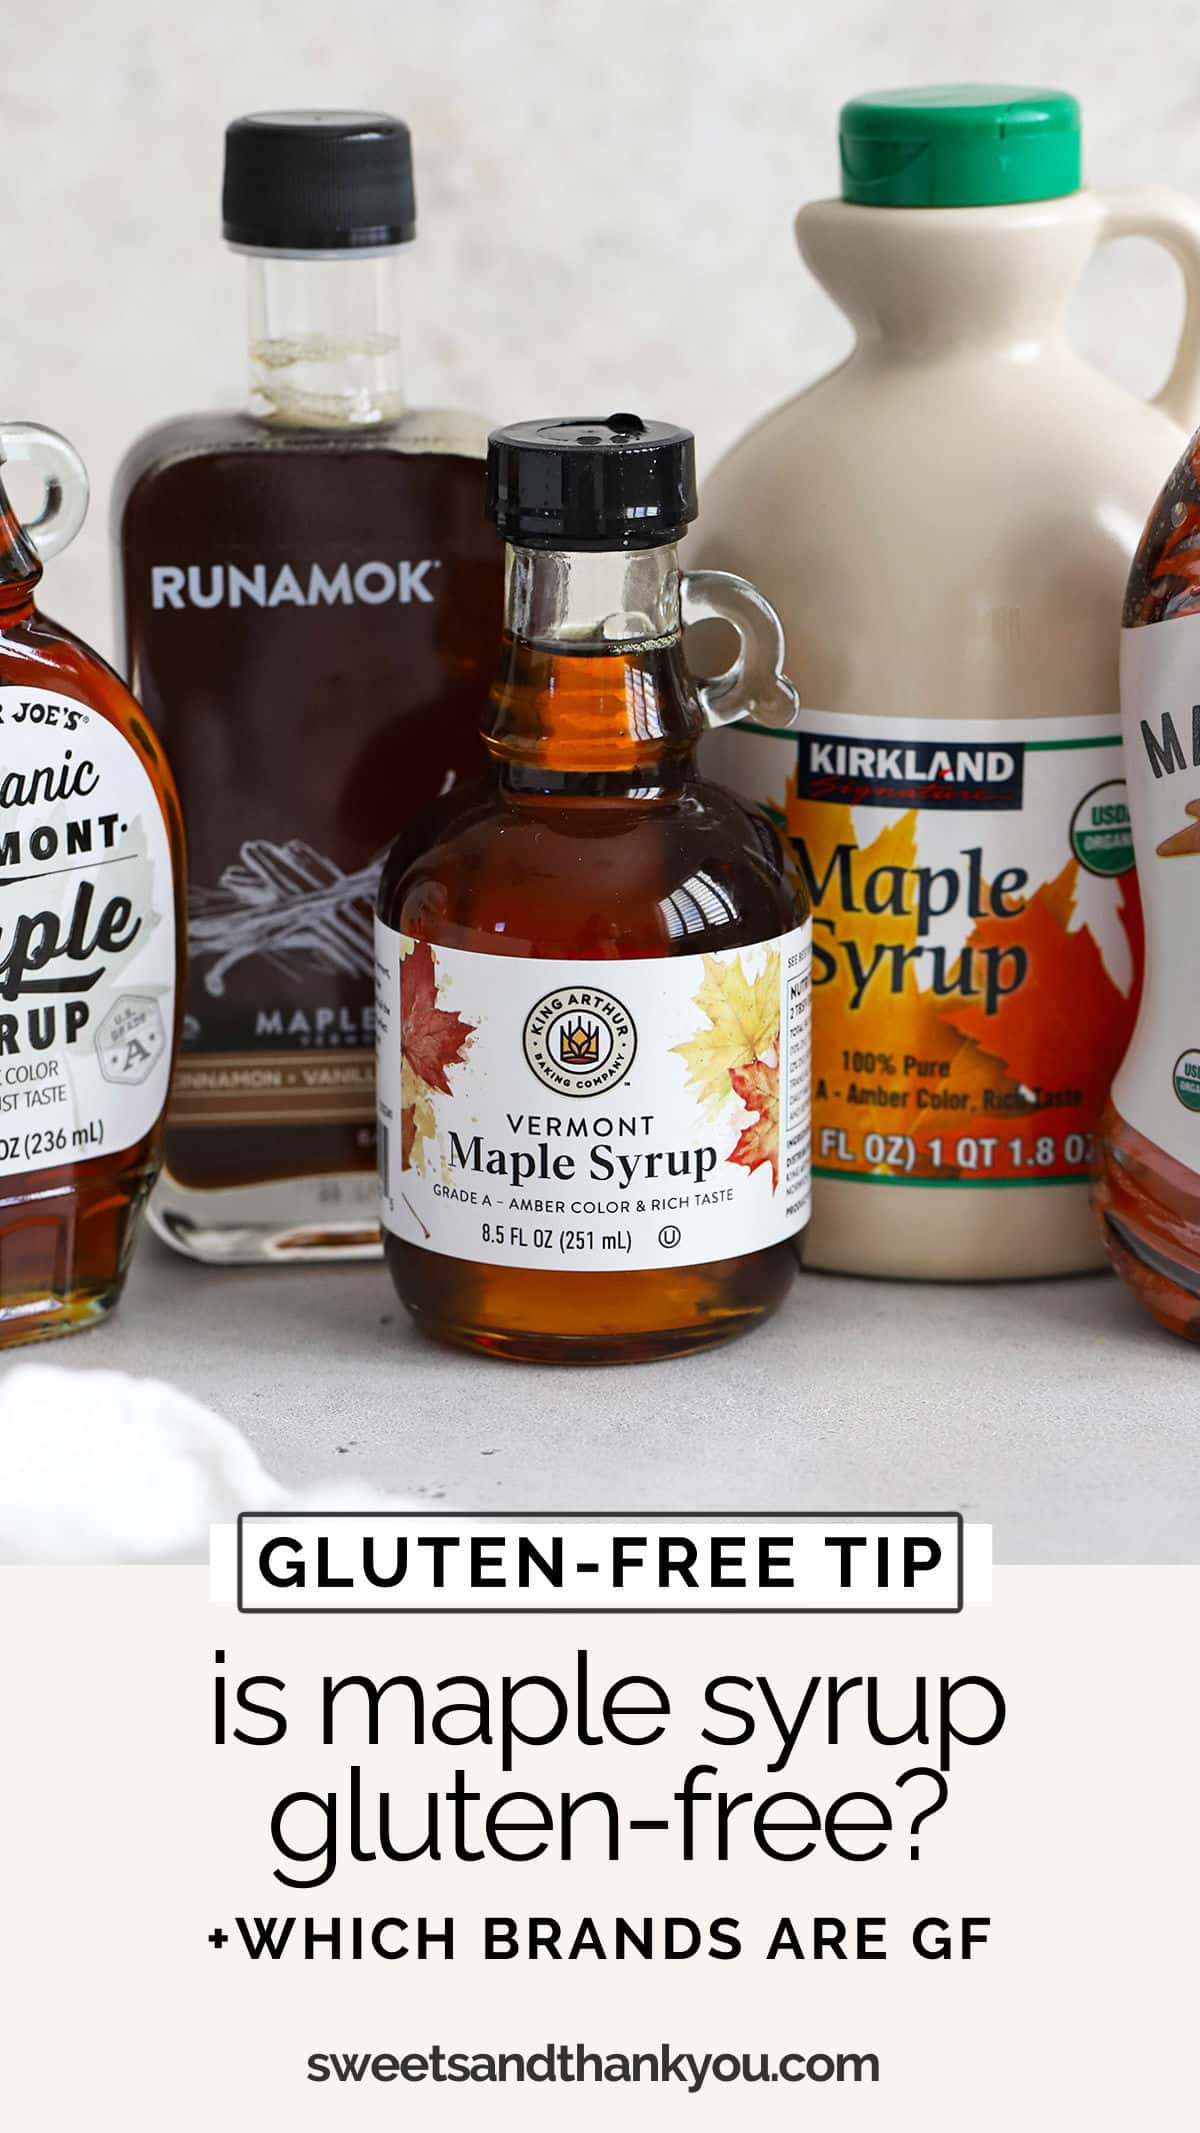 Is Maple Syrup Gluten-Free? We'll walk you through everything you need to know about gluten-free syrup, gluten-free pancake syrup and more! // is pancake syrup gluten free / is pearl milling syrup gluten free / is log cabin syrup gluten free / is mrs. butterworth syrup gluten free / is hungry jack syrup gluten free / is pure maple syrup gluten-free / is syrup gluten free